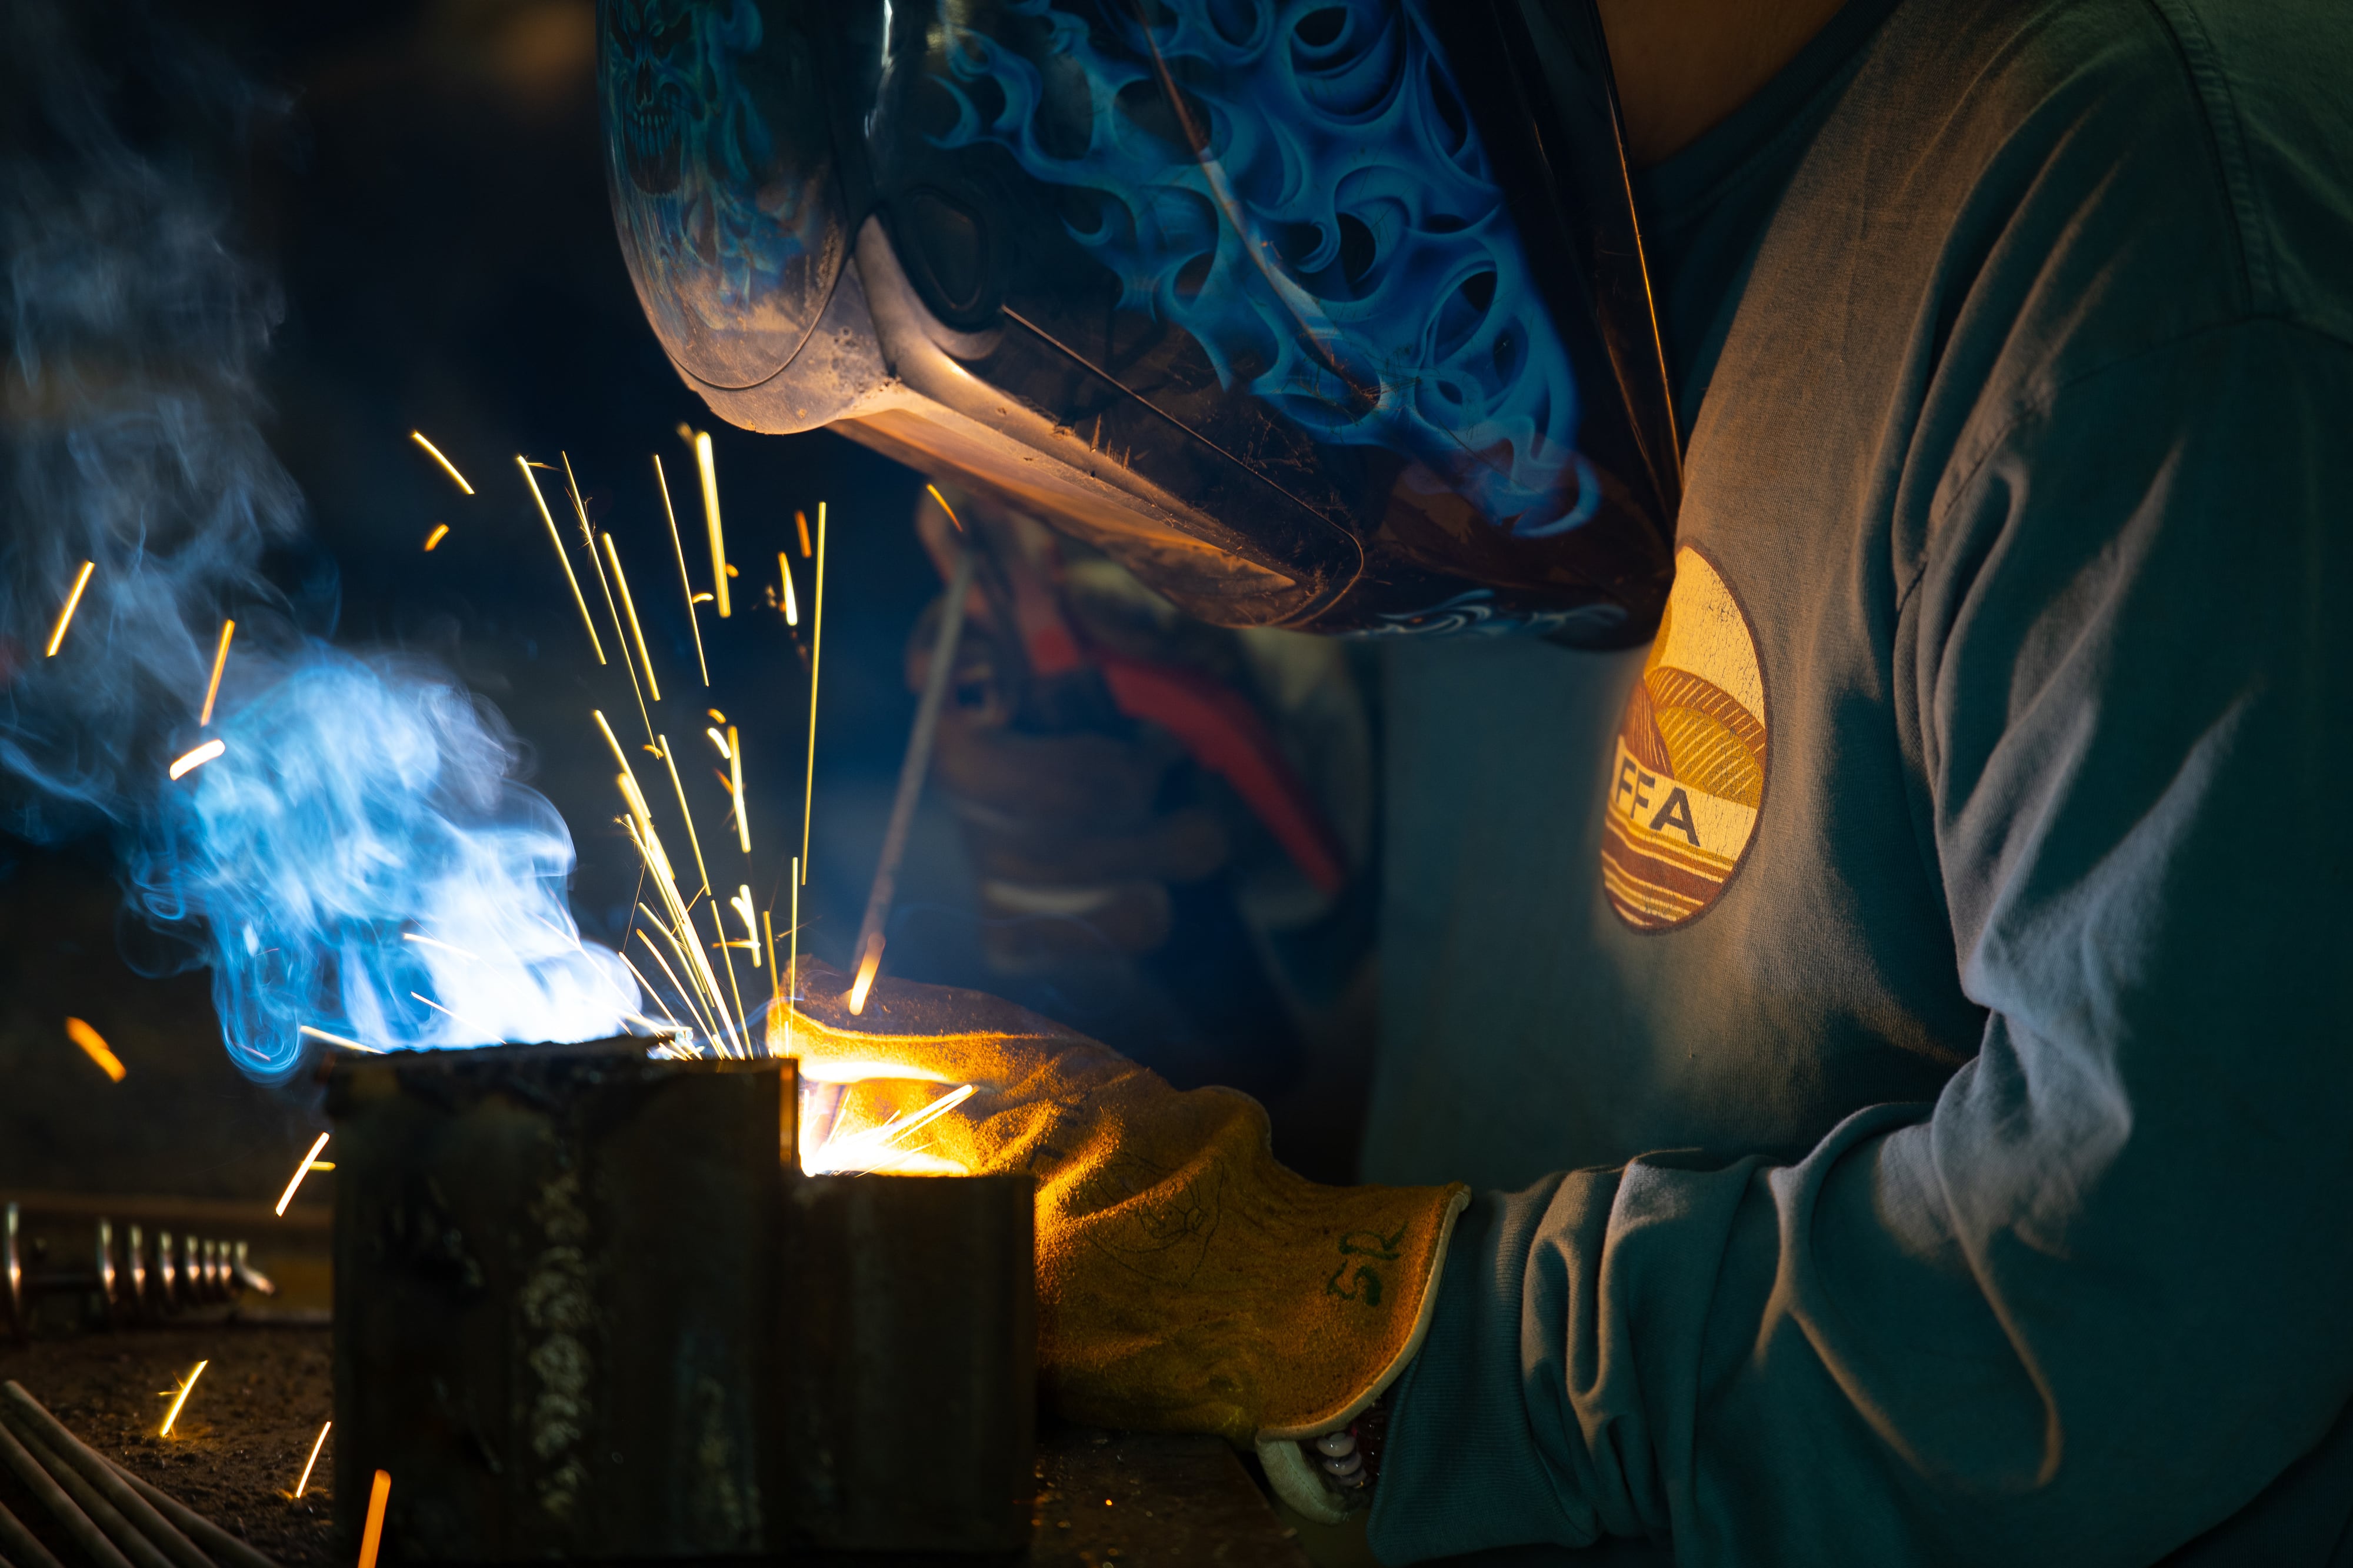 A close up of a welder working on a project with sparks flying.